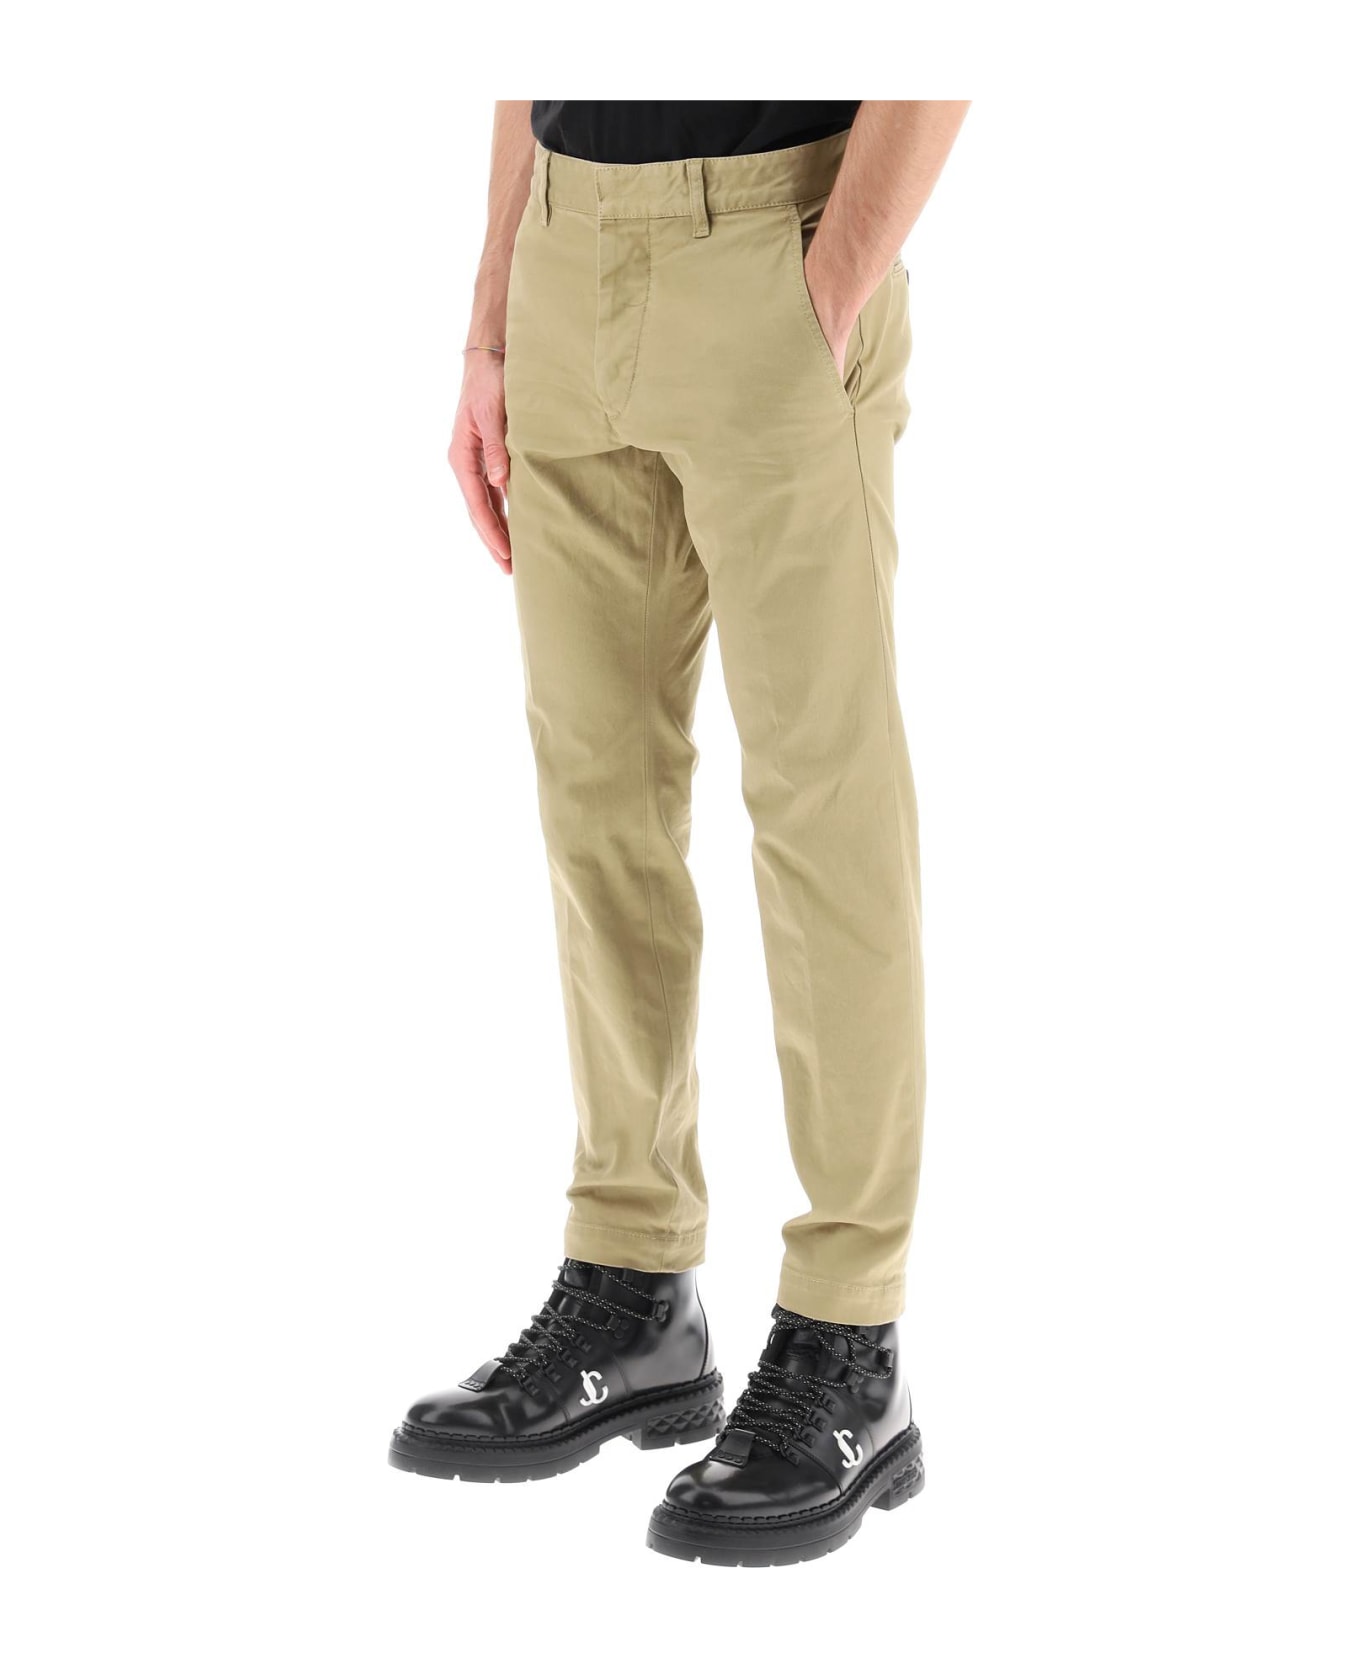 Dsquared2 Cool Guy Pants - TAUPE (Beige)